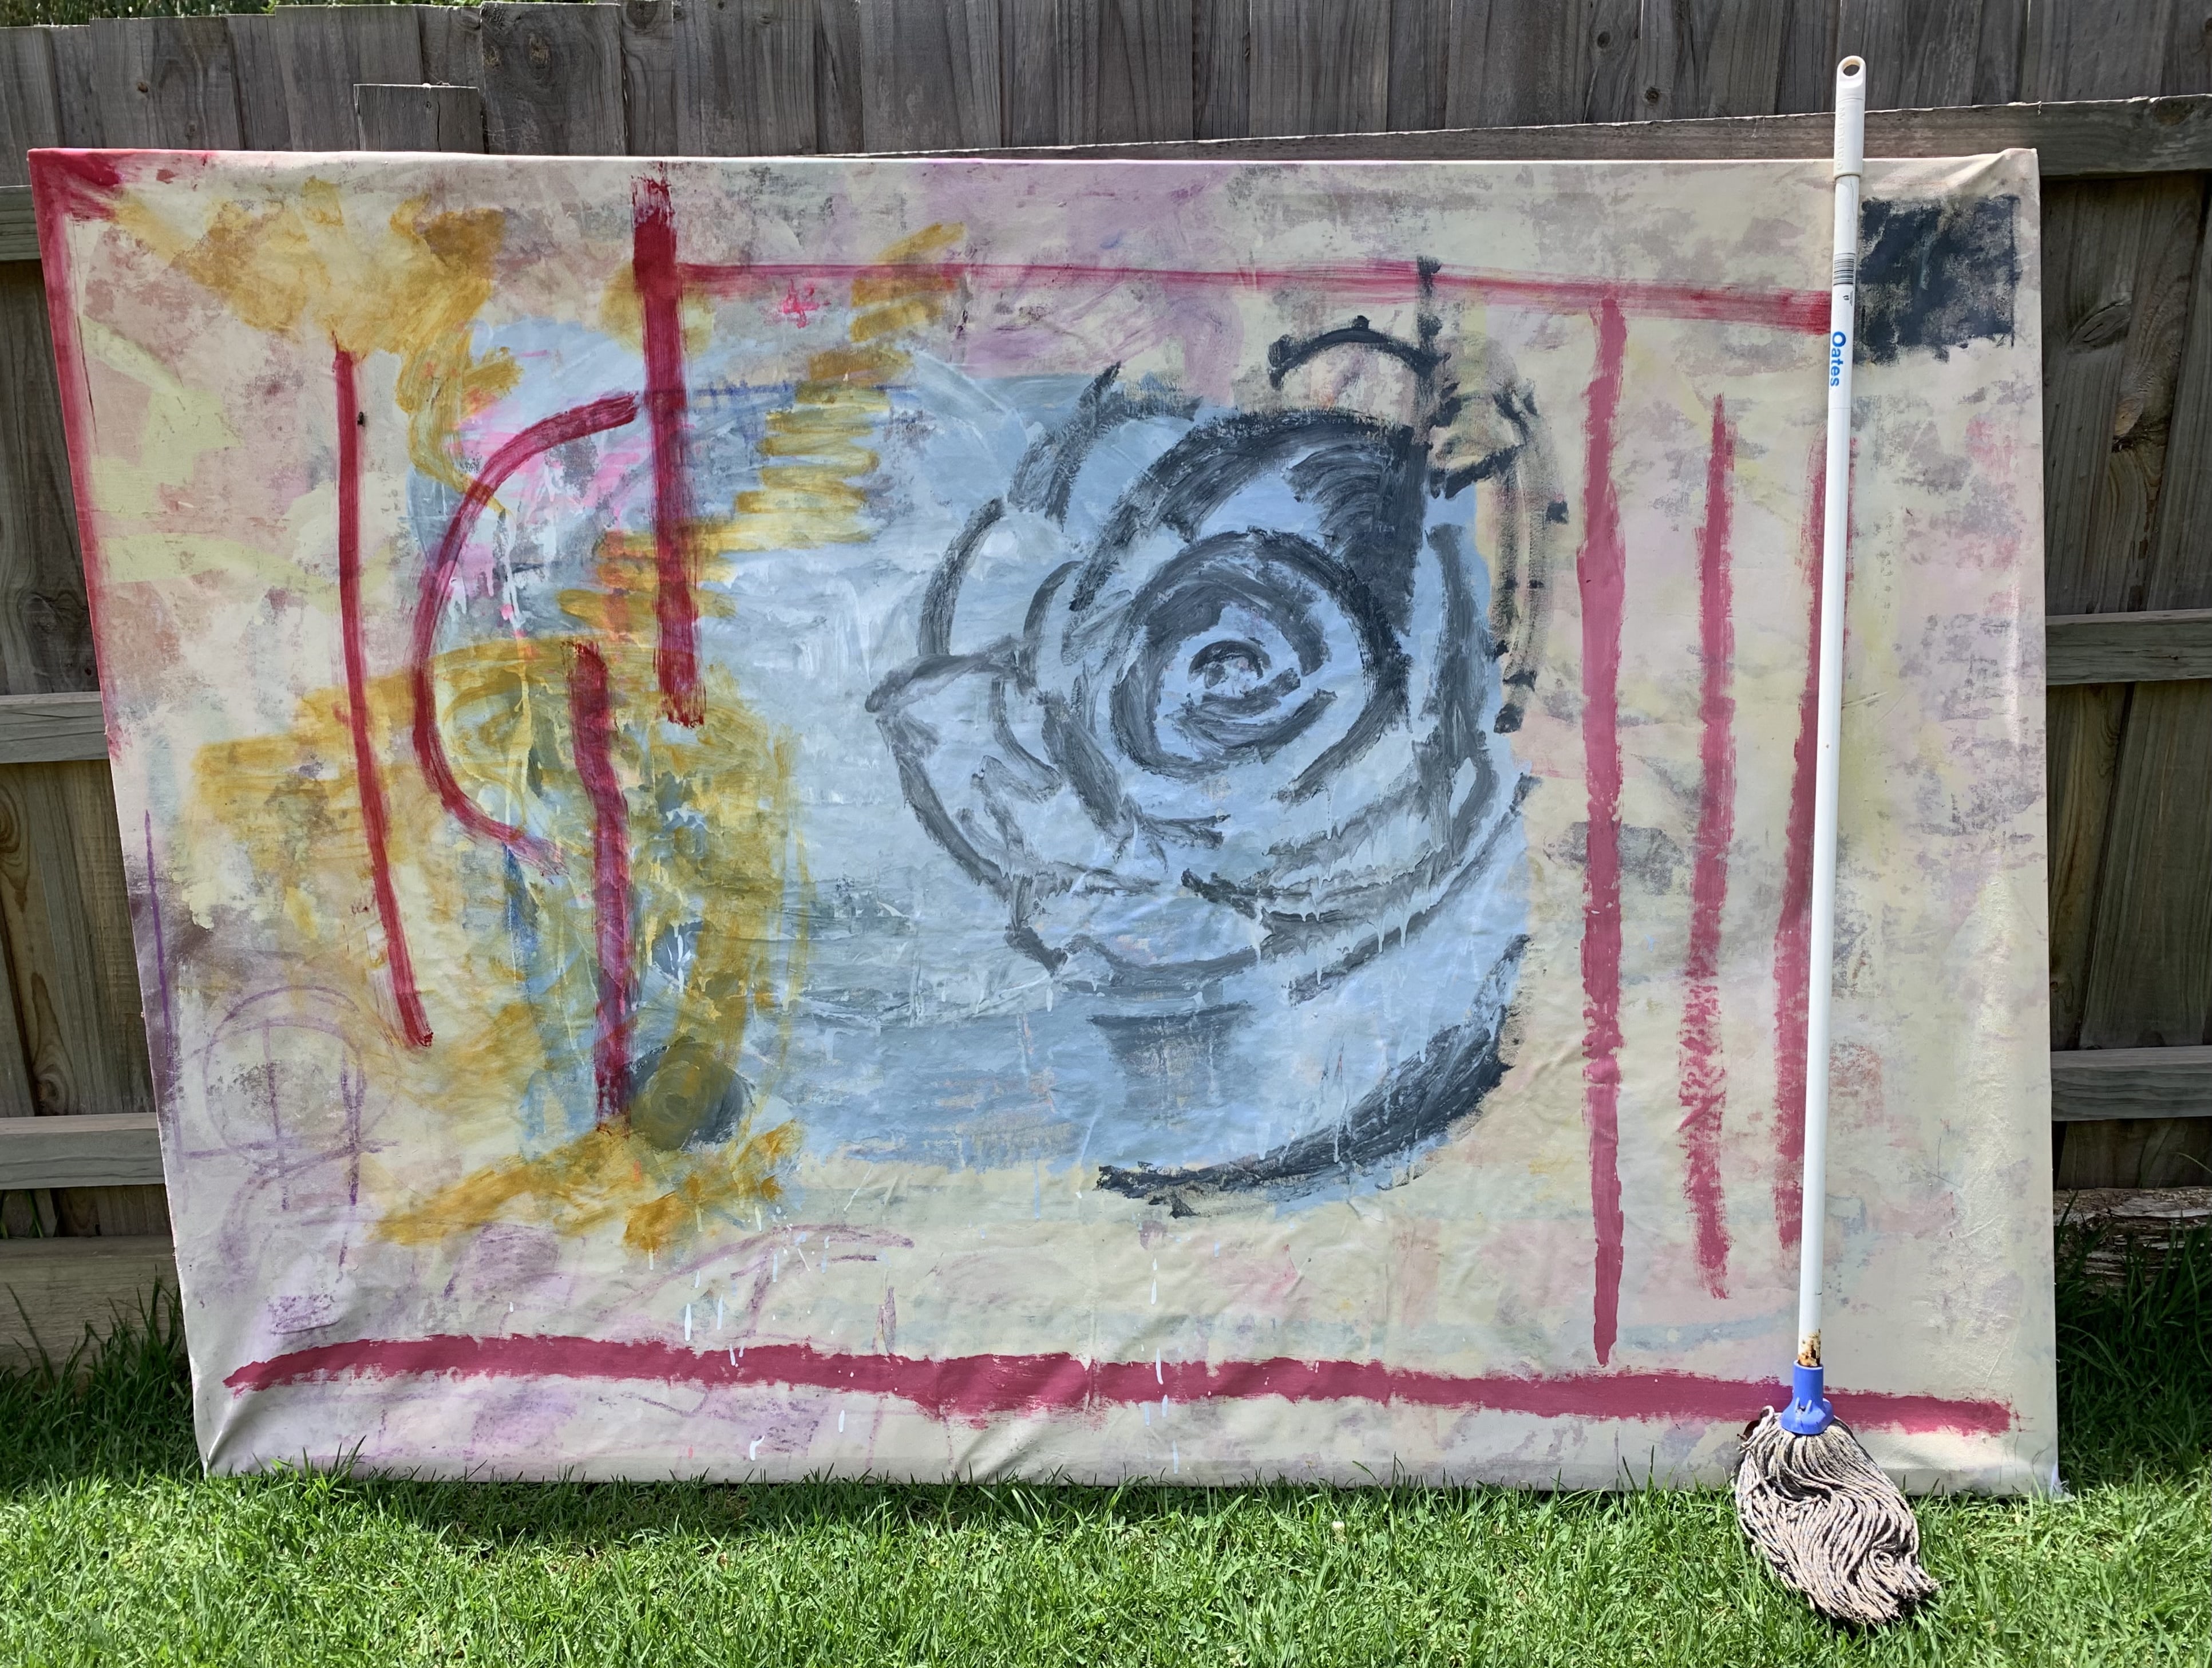 A photograph of a canvas artwork. In situ to the artwork is a brown fence and bright green grass in the foreground. The canvas includes gestural movements, lines, brush marks and strong red markings. In the centre of the image is a blue shape and overlaid a rose drawn in navy paint.